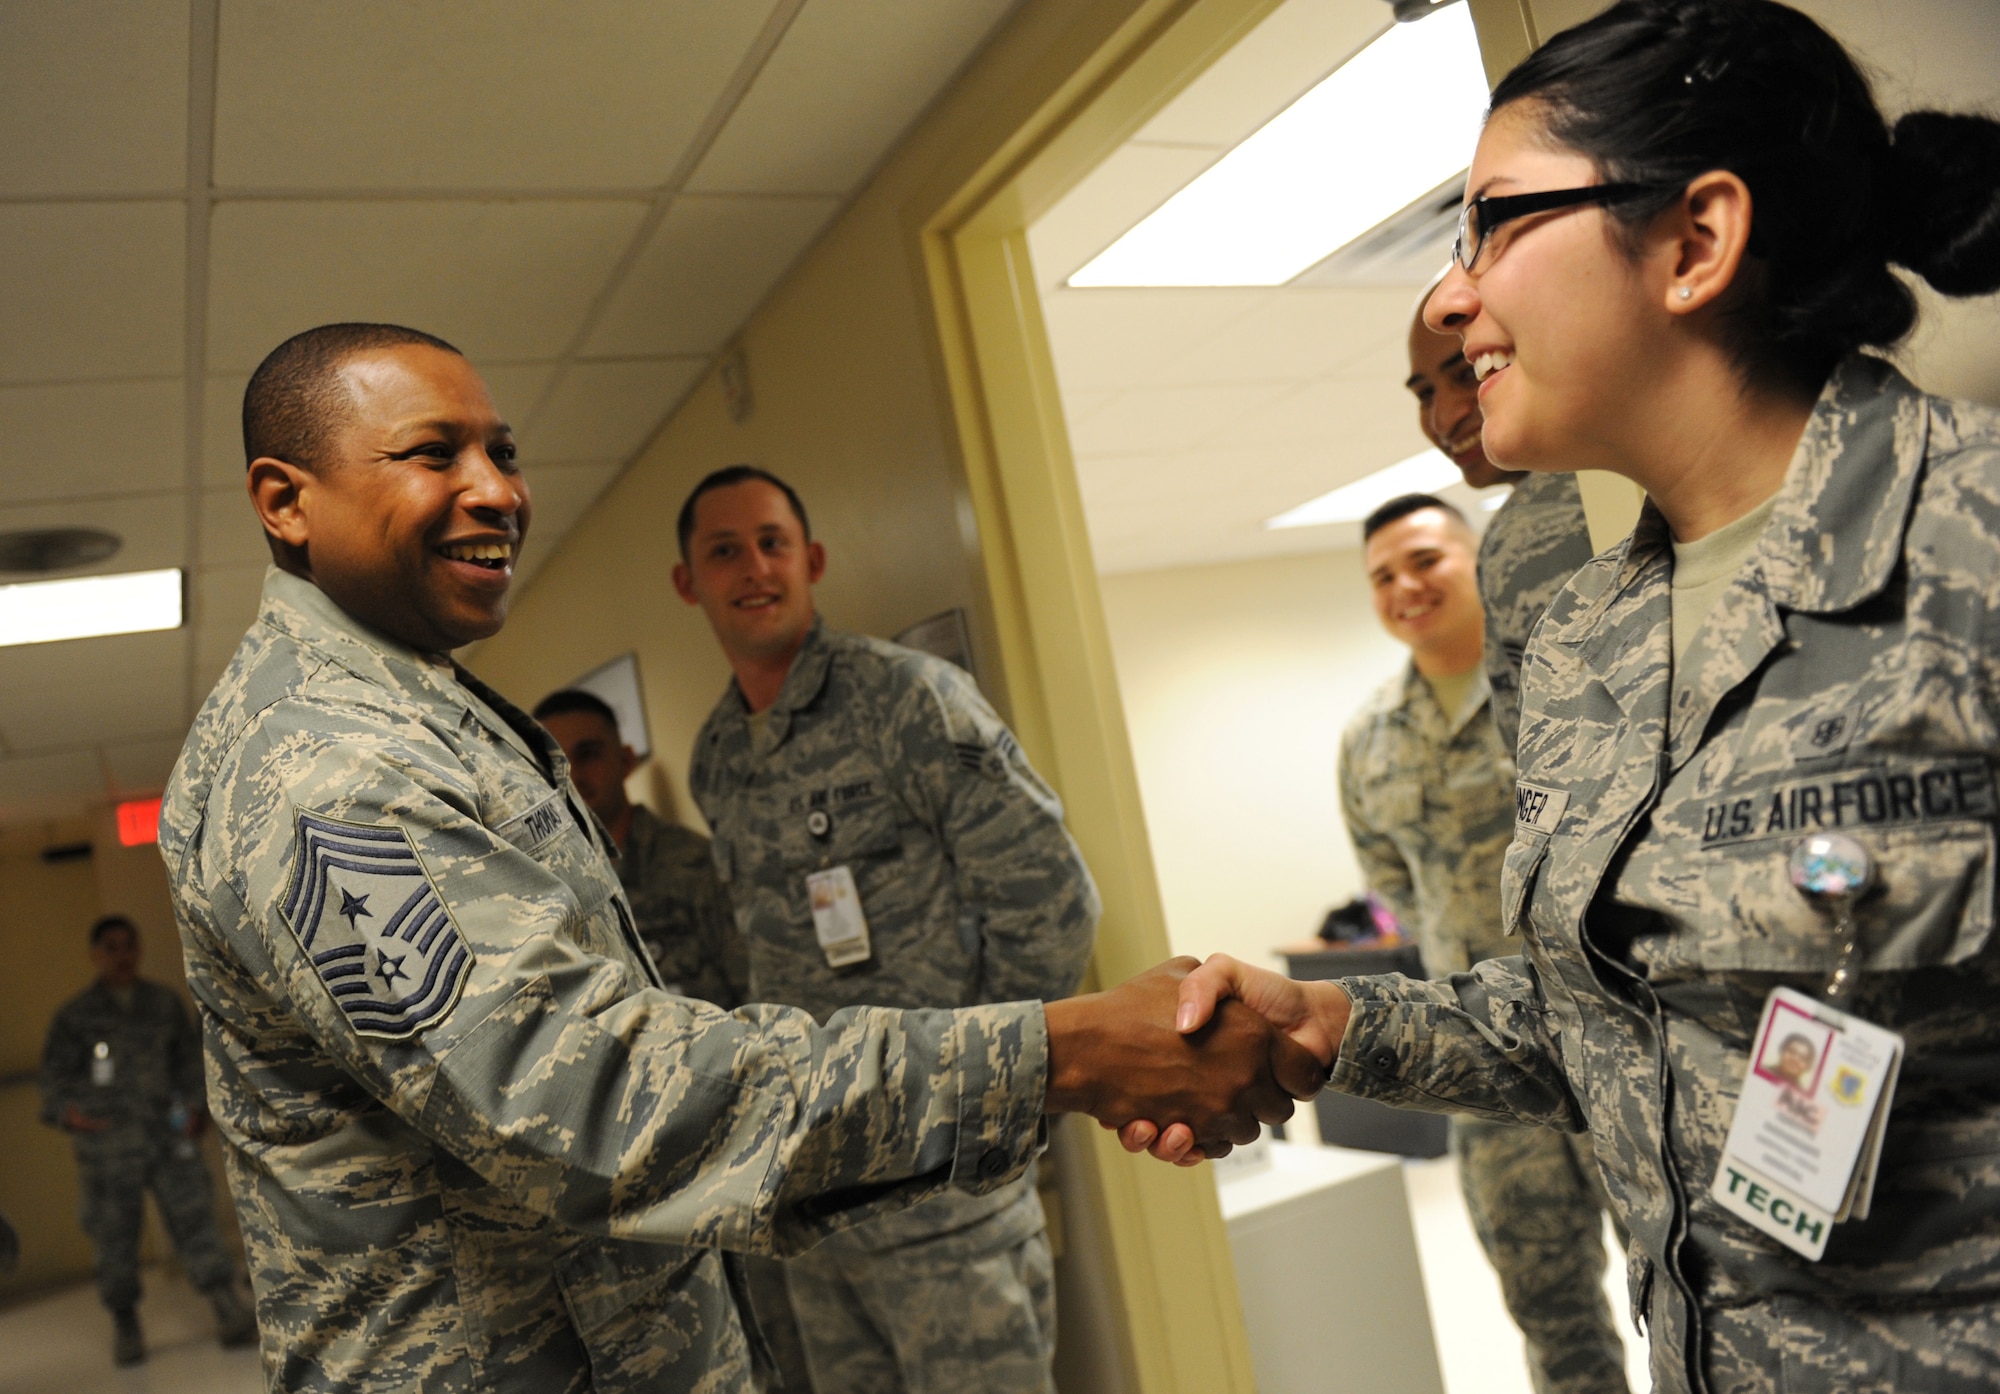 Chief Master Sgt. Farrell Thomas, 2nd Air Force command chief, recognizes Airman 1st Class Yvette Redinger, 81st Dental Squadron dental technician, by giving her a coin during an immersion tour at the Keesler Medical Center Mar.8, 2016, Keesler Air Force Base, Miss. Thomas visited the 81st Medical Group to become oriented with group missions, operations and personnel. (U.S. Air Force photo by Kemberly Groue)